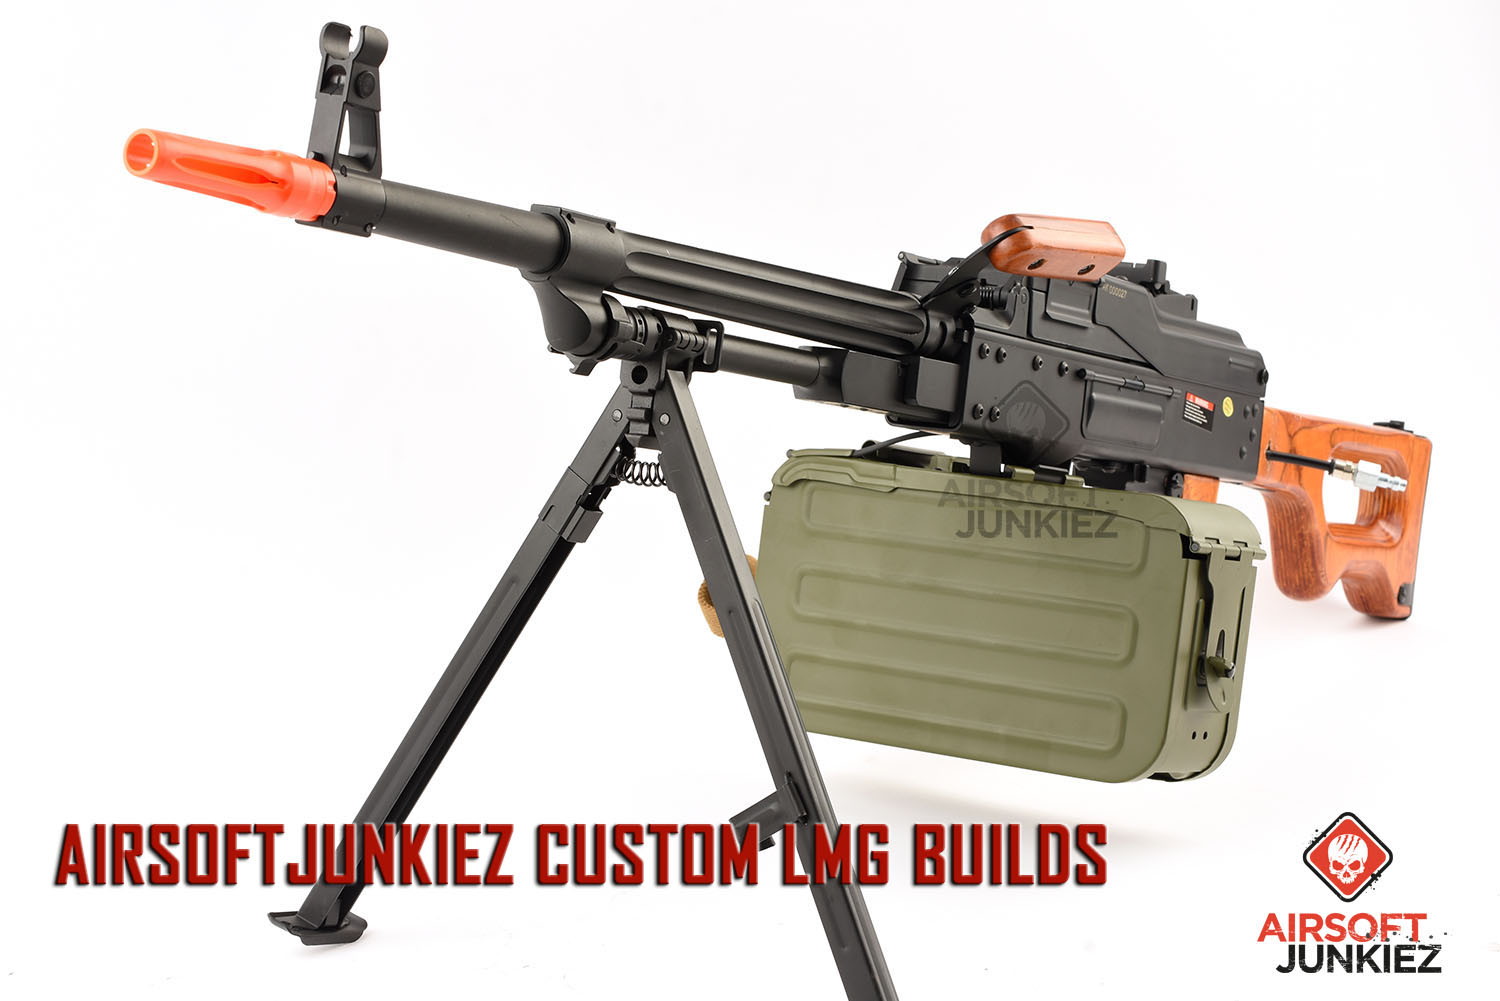 Get Your Airsoft Fix! Home of custom PolarStar & Wolverine builds &  modifications. Fast processing and shipping.